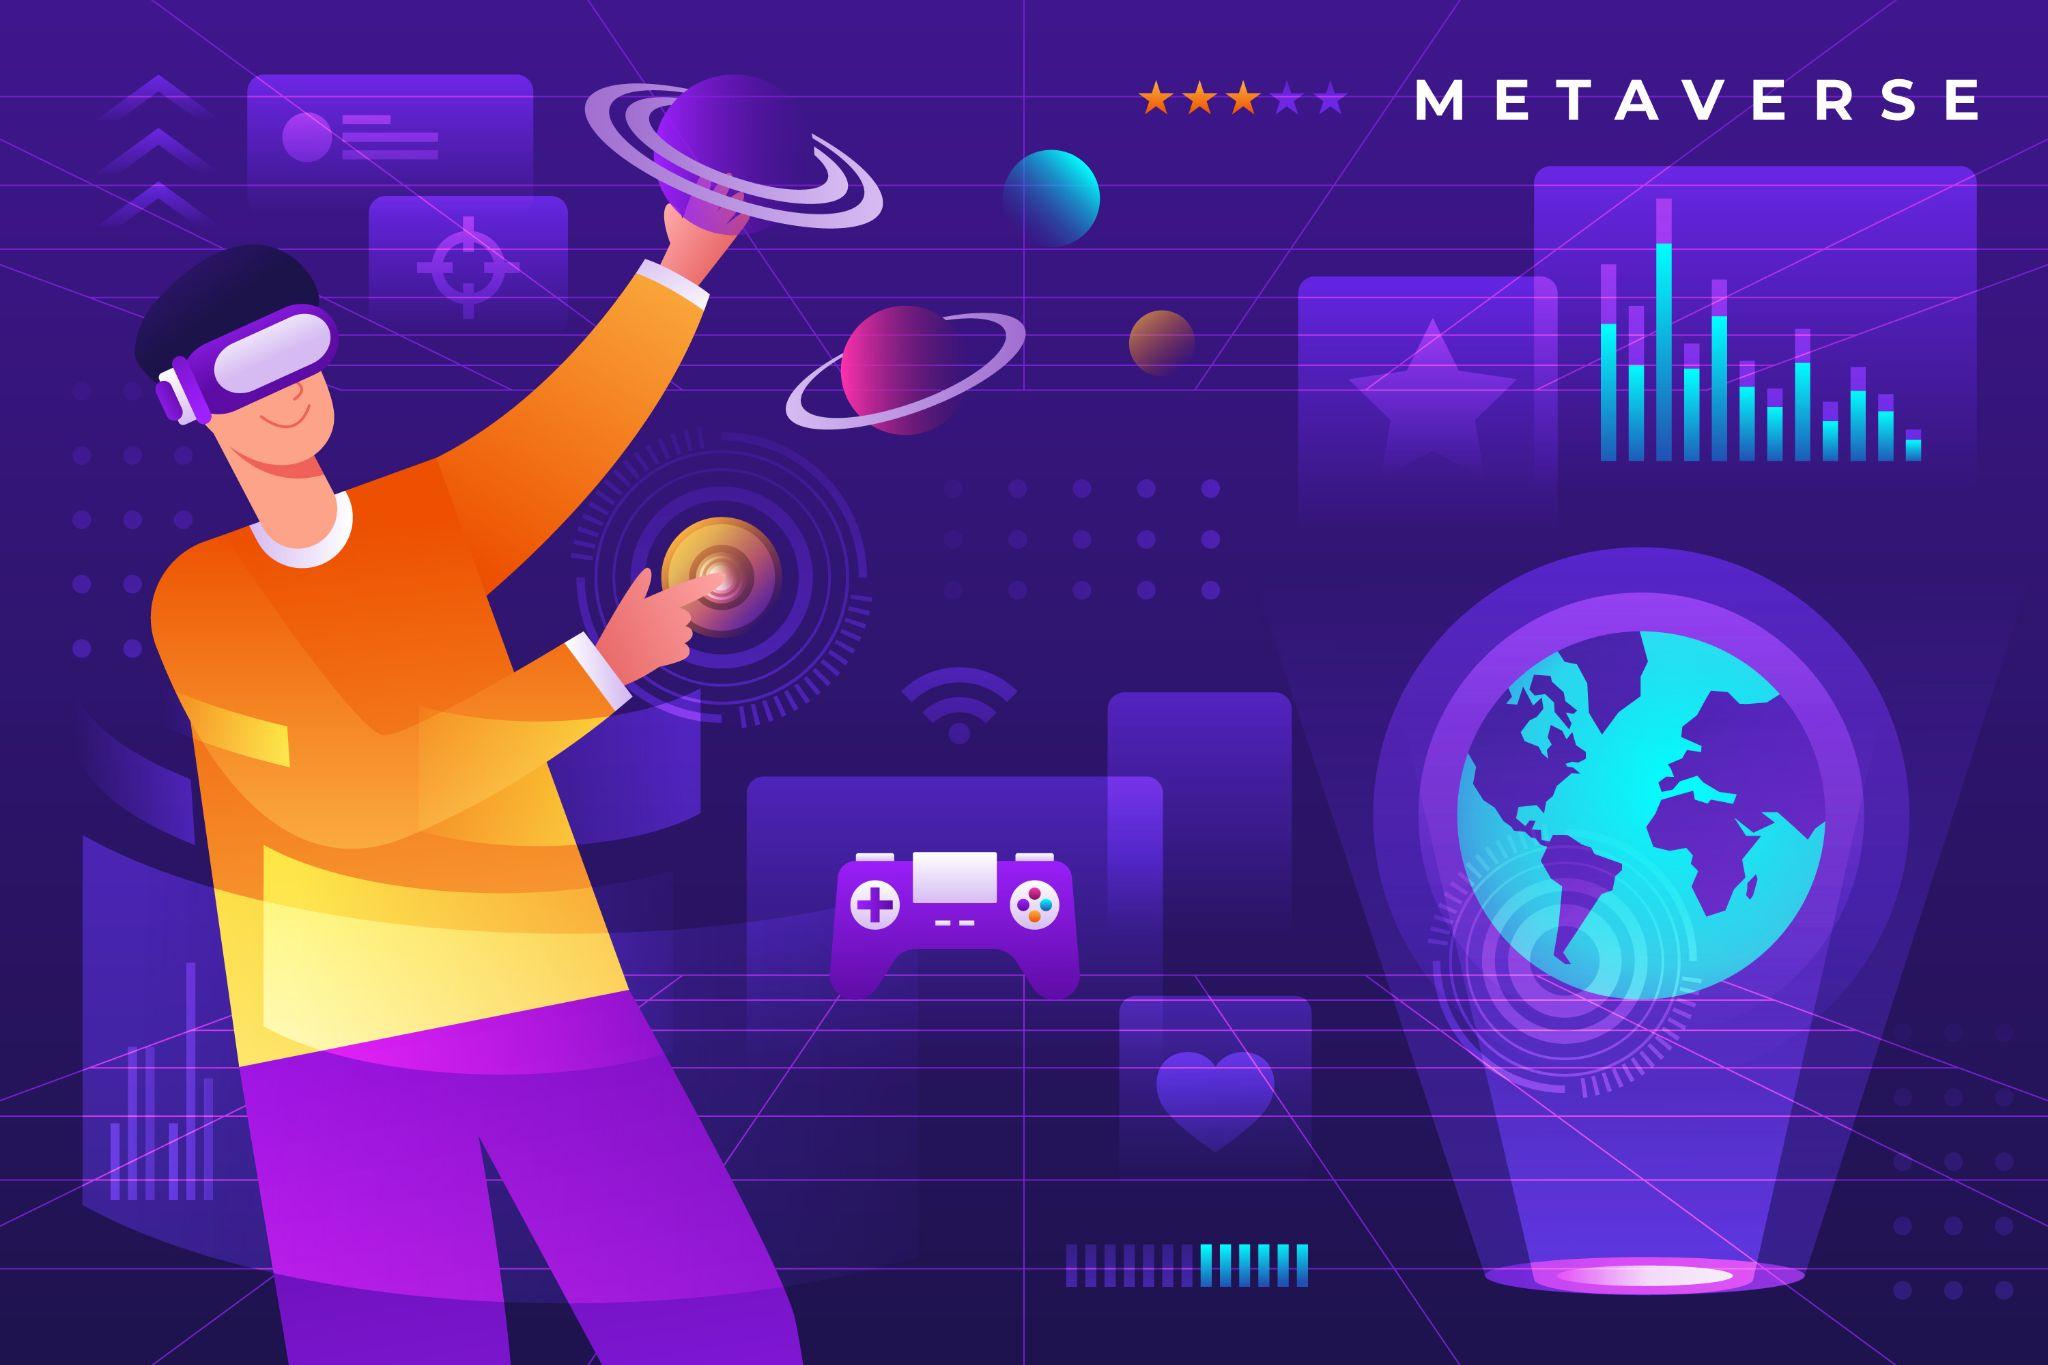 Demystifying the Onboarding in Metaverse